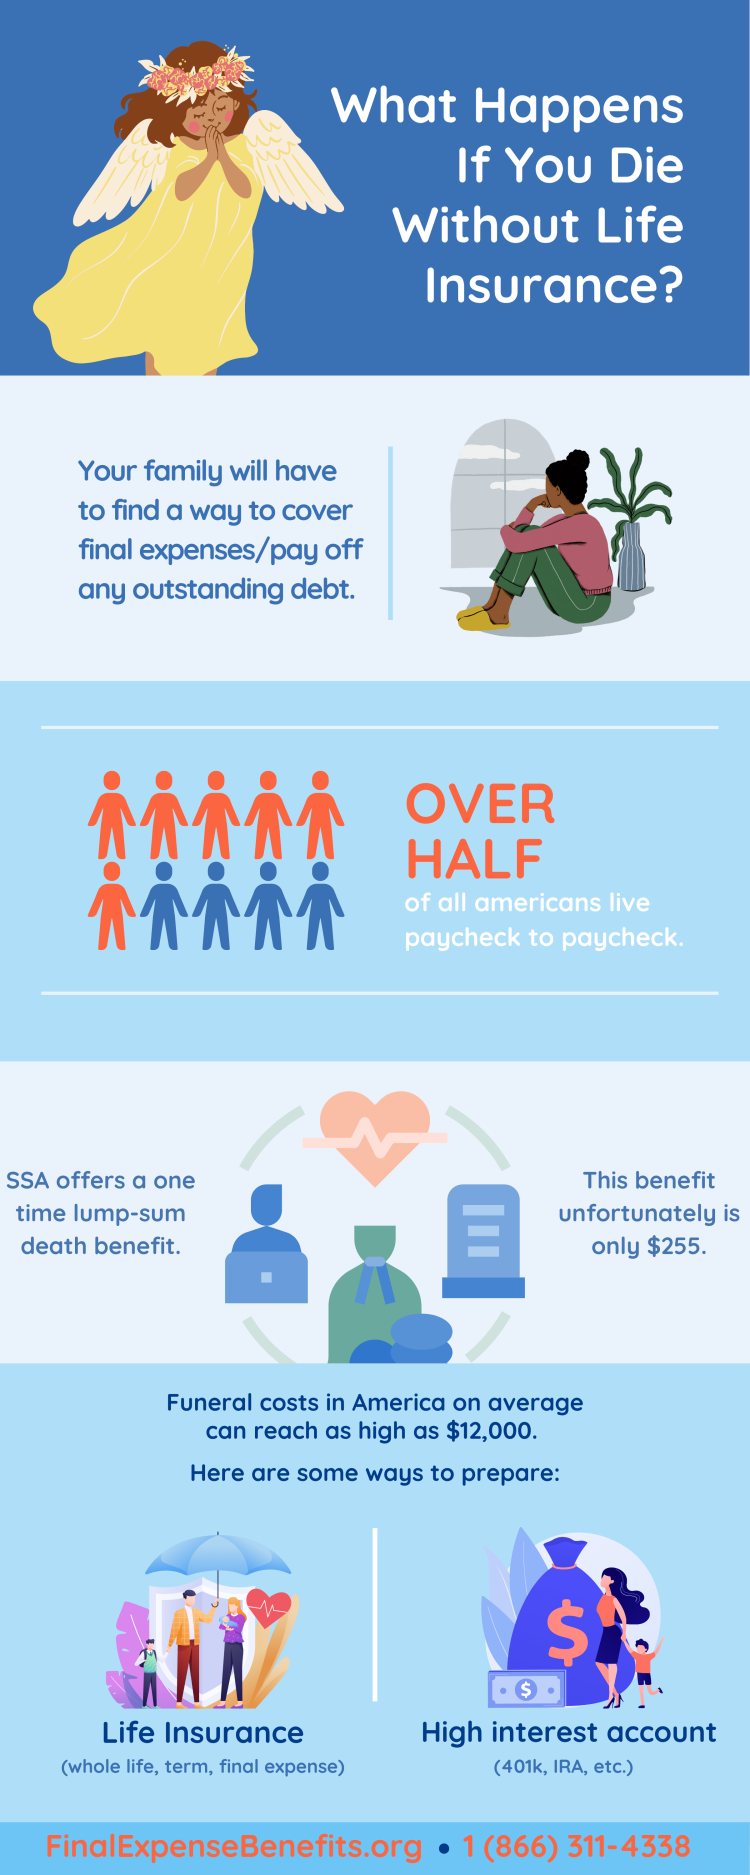 Our infographic describing what happens if you die, and what you can do to prepare.